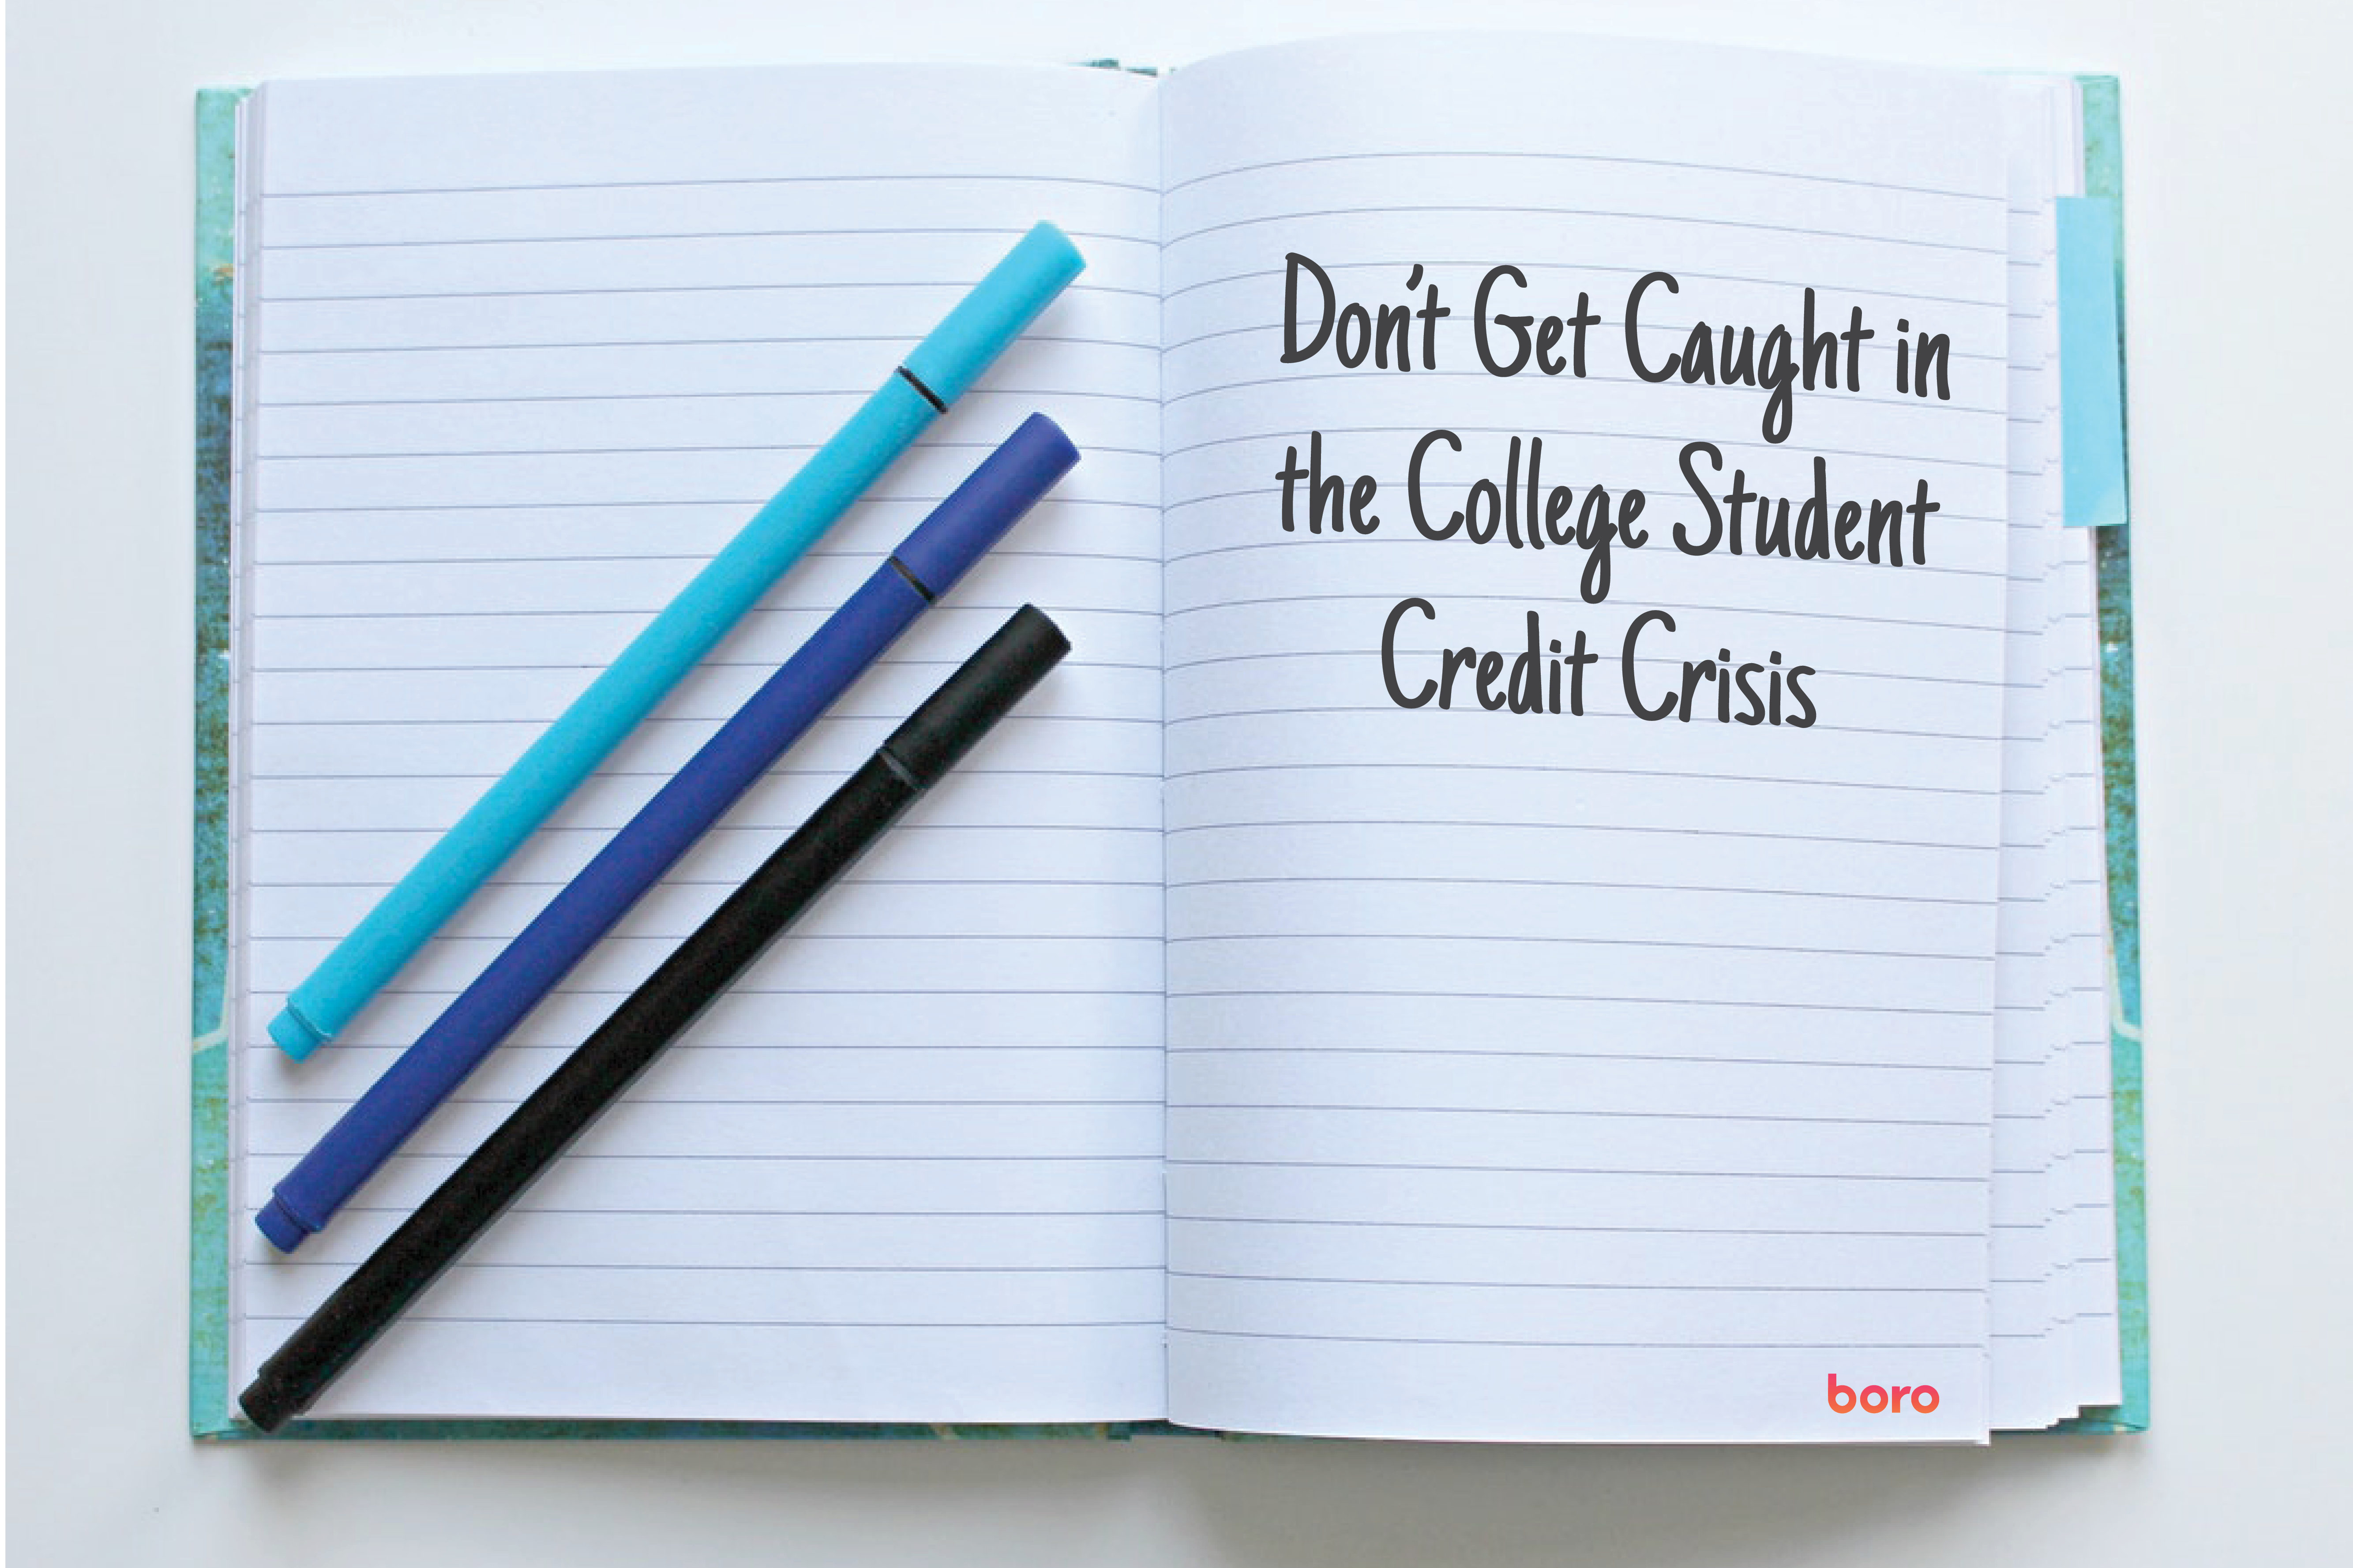 Don’t Get Caught in the College Student Credit Crisis